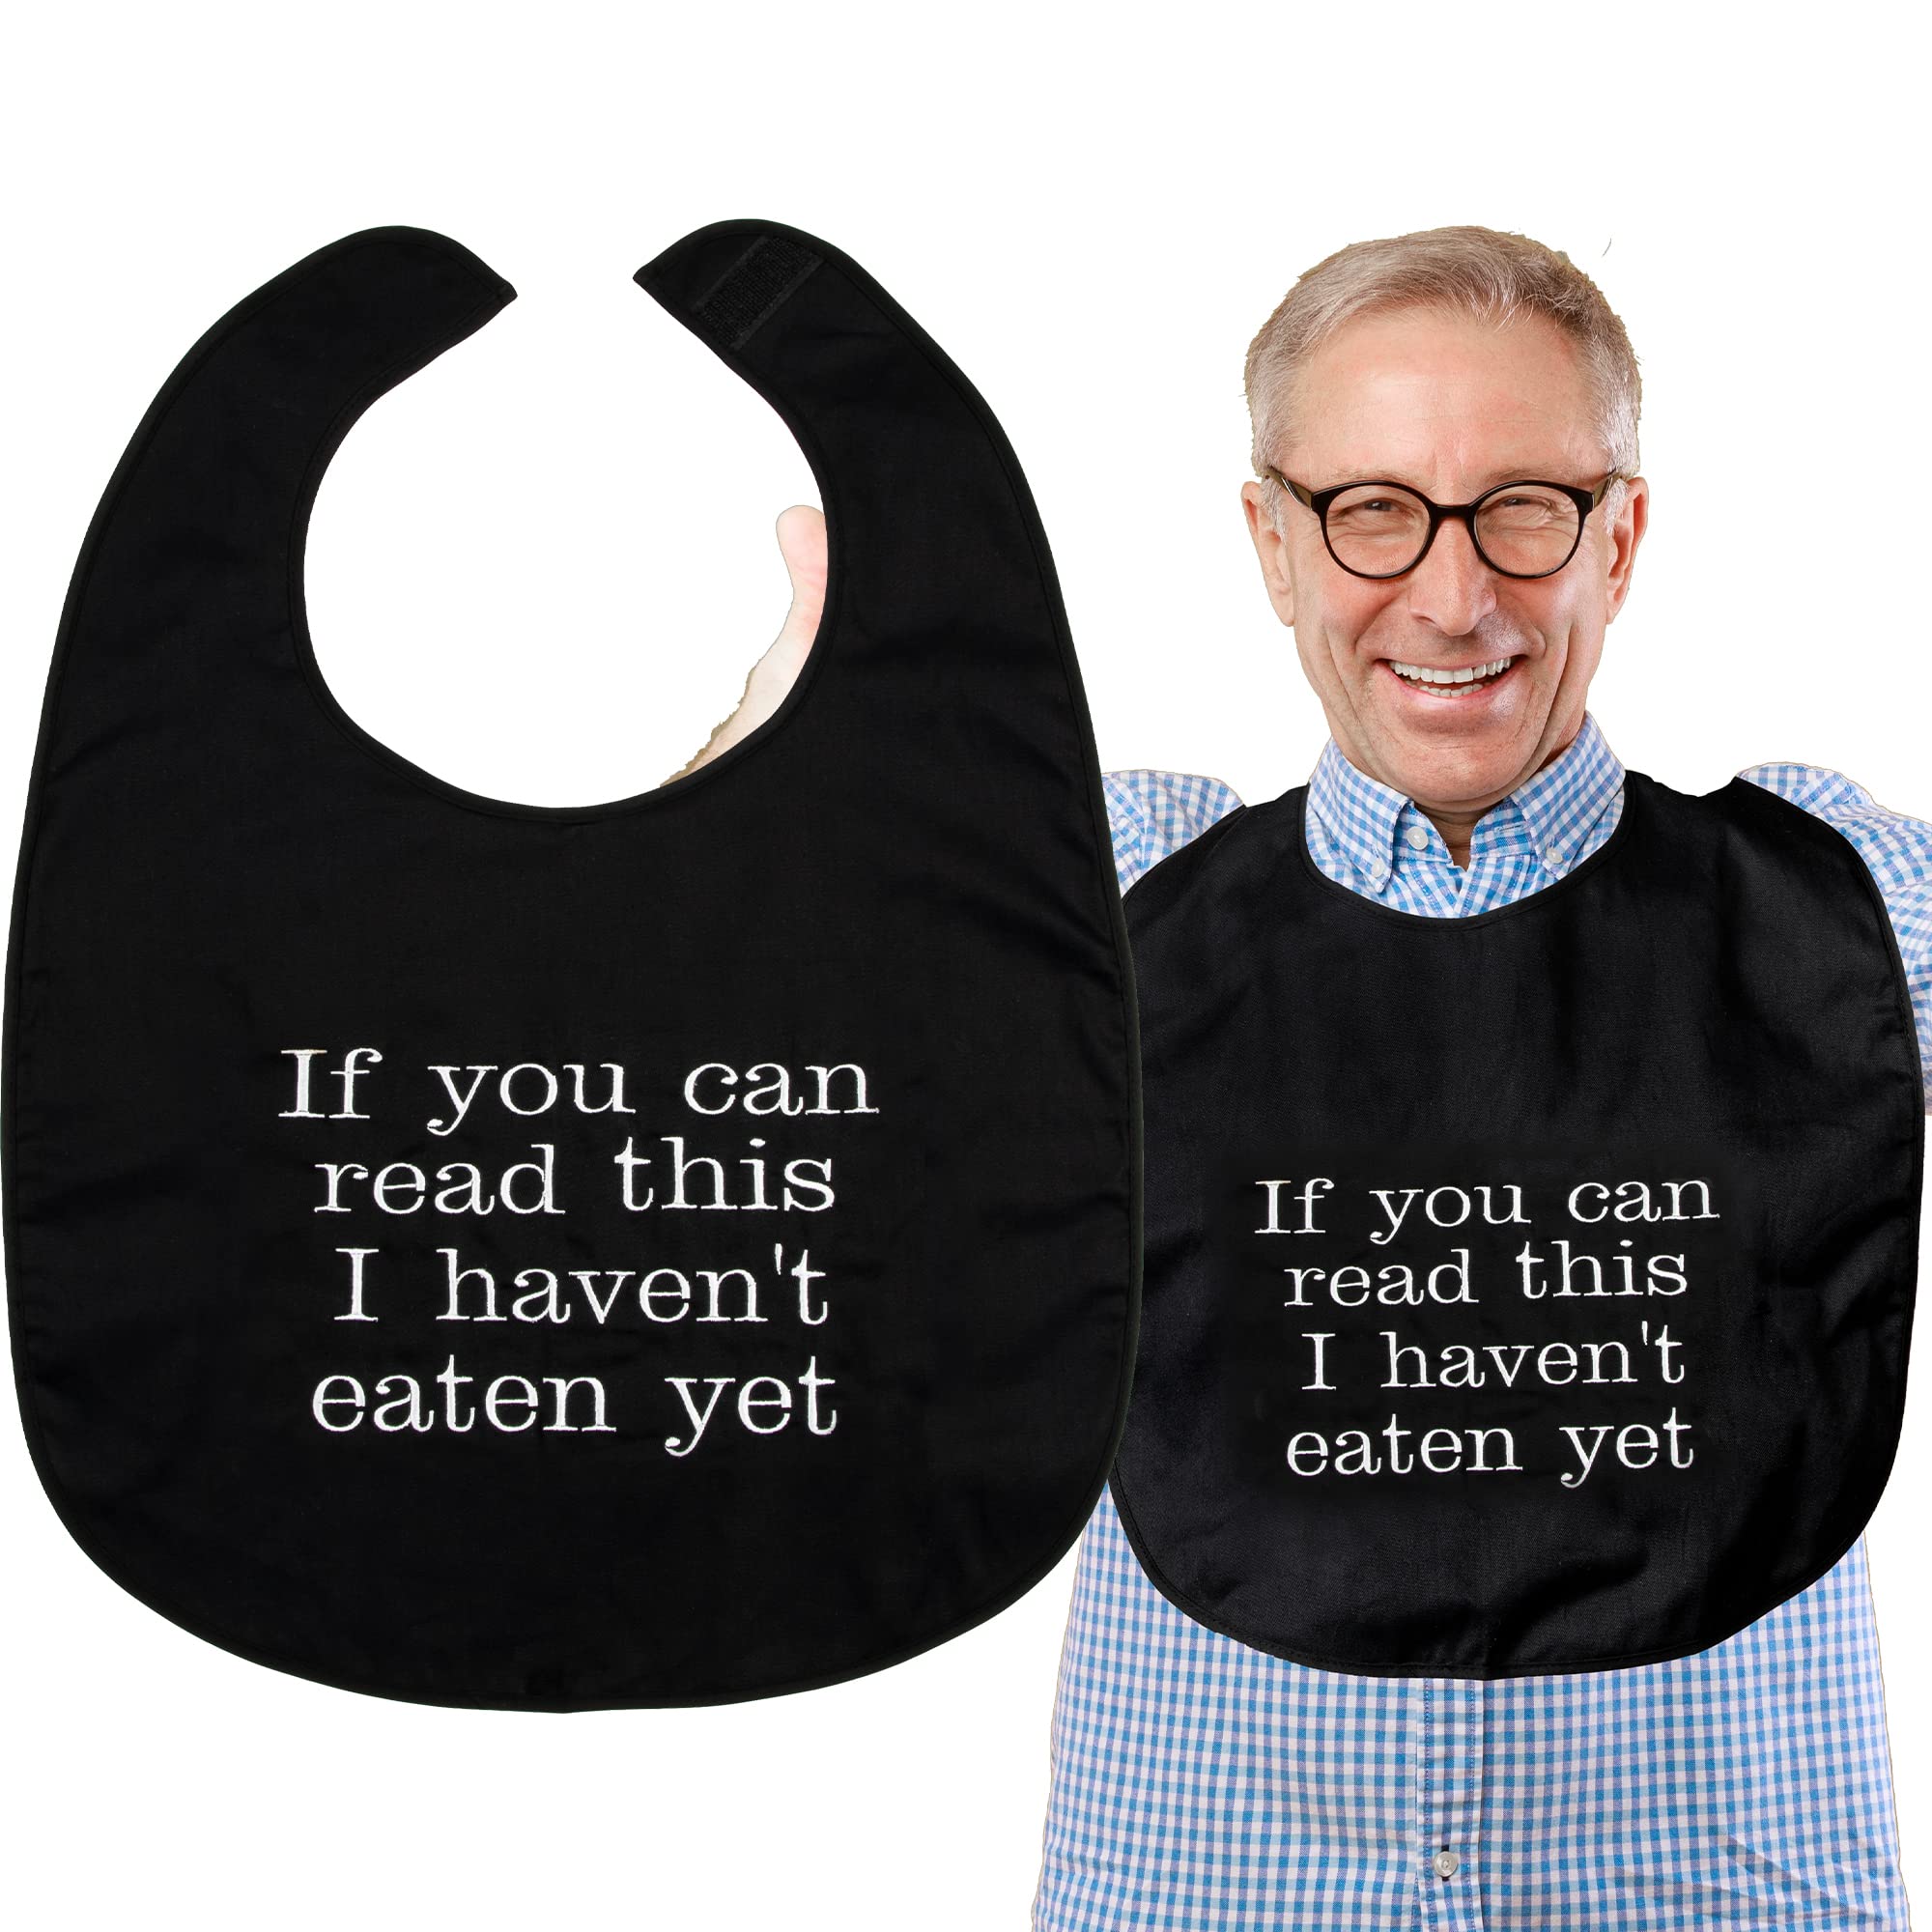 Adult Bibs for Men and Women - Gag Gifts Funny for Adults, Best Gifts for Elderly Man, Over the Hill Gifts for Men, Eating Bibs for Adults for Women.